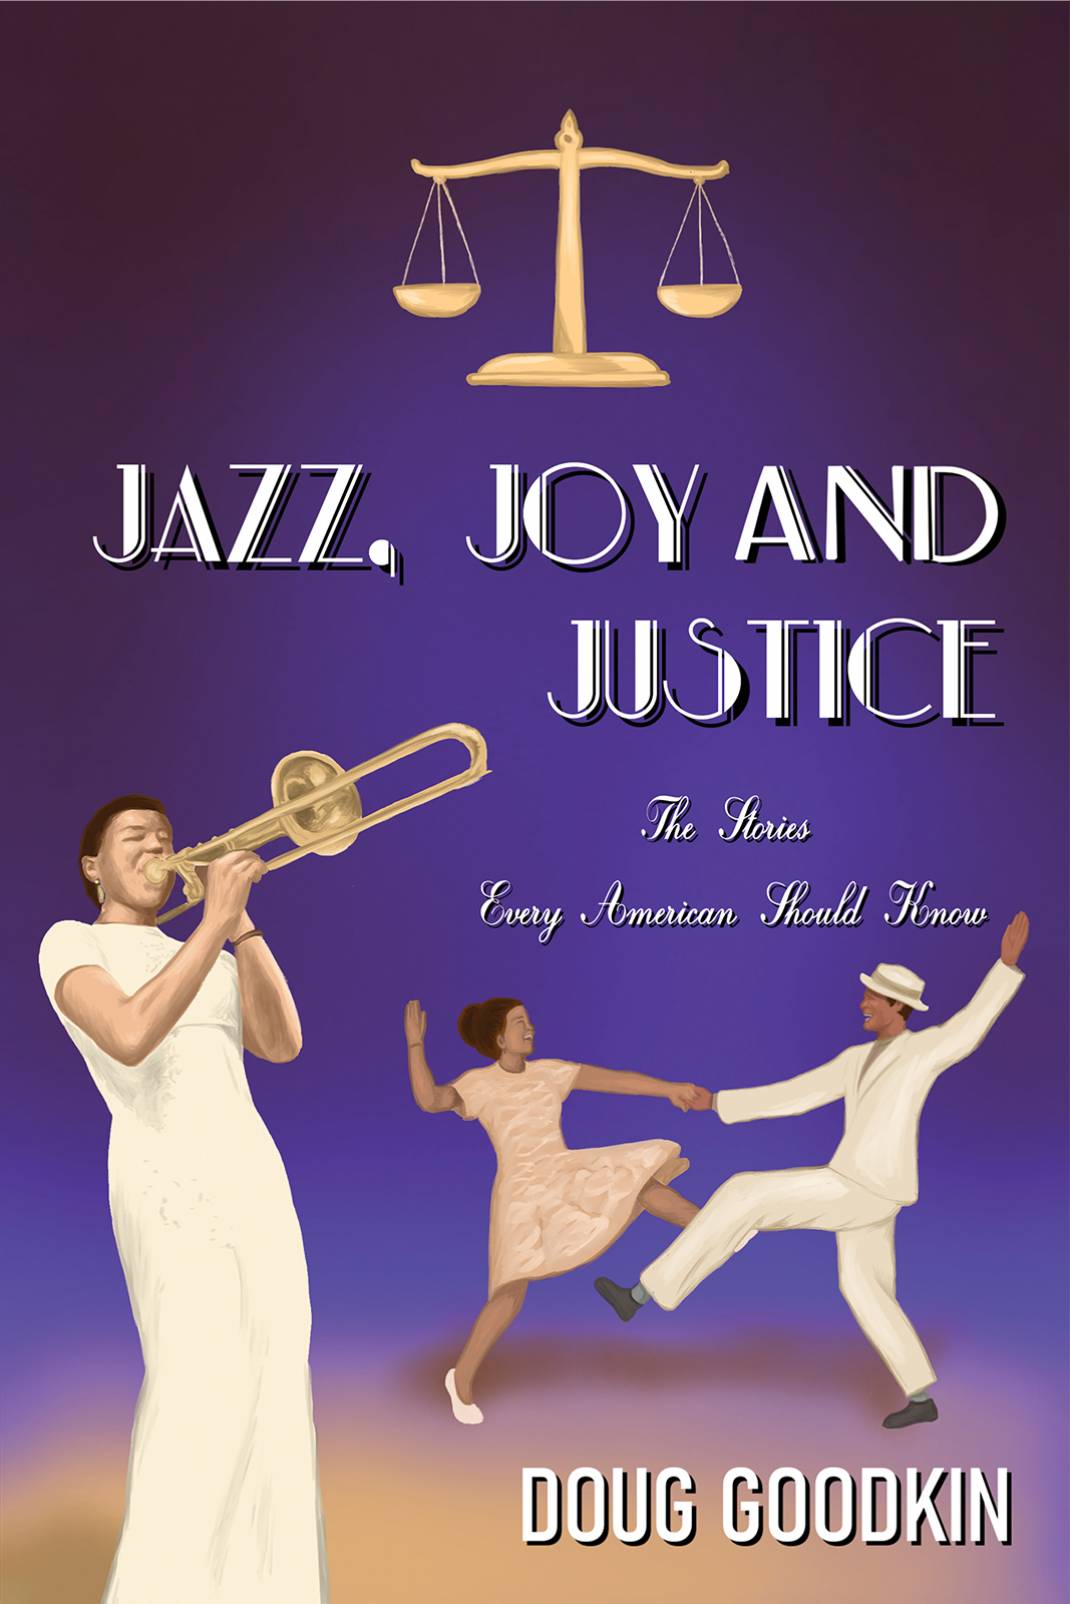  <!-- 1 -->Jazz, Joy and Justice:  The Stories Every American Should Know<br>Doug Goodkin